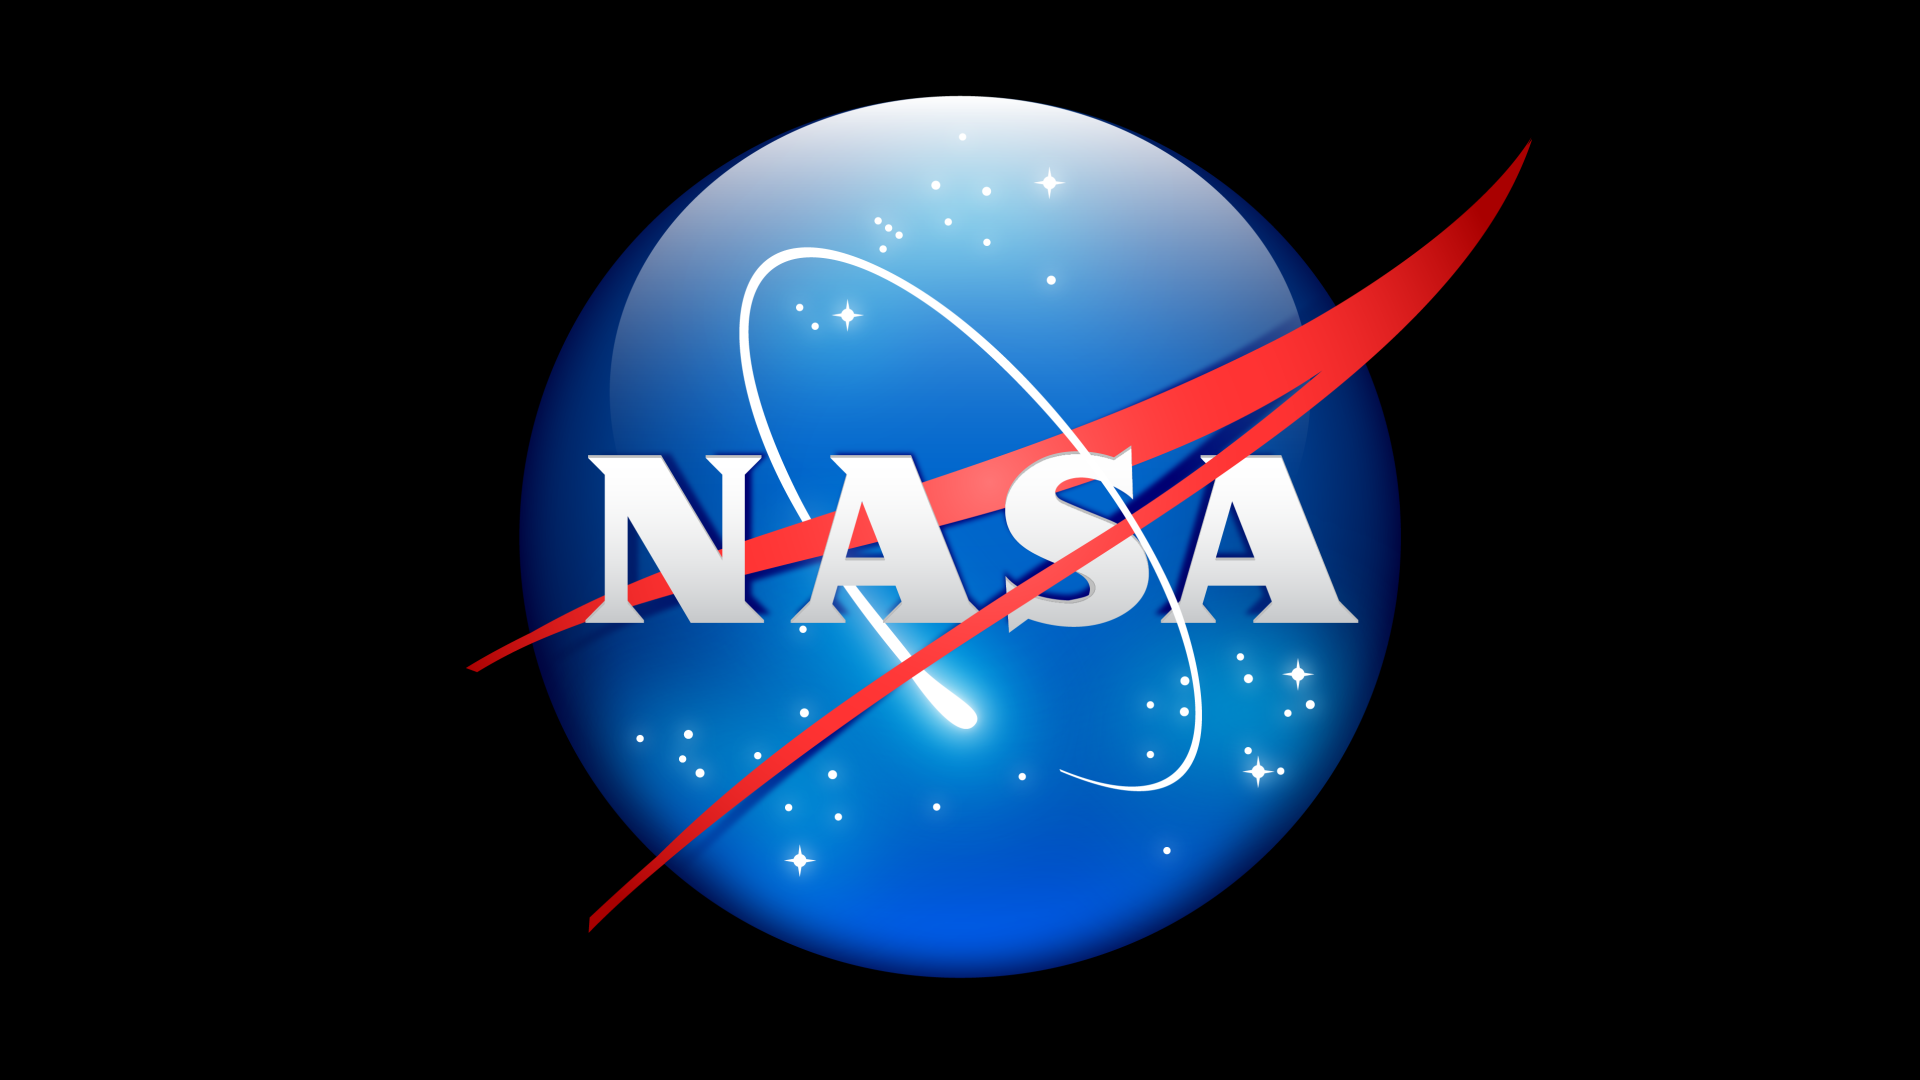 Black Background Nasa Wallpaper And Image Pictures